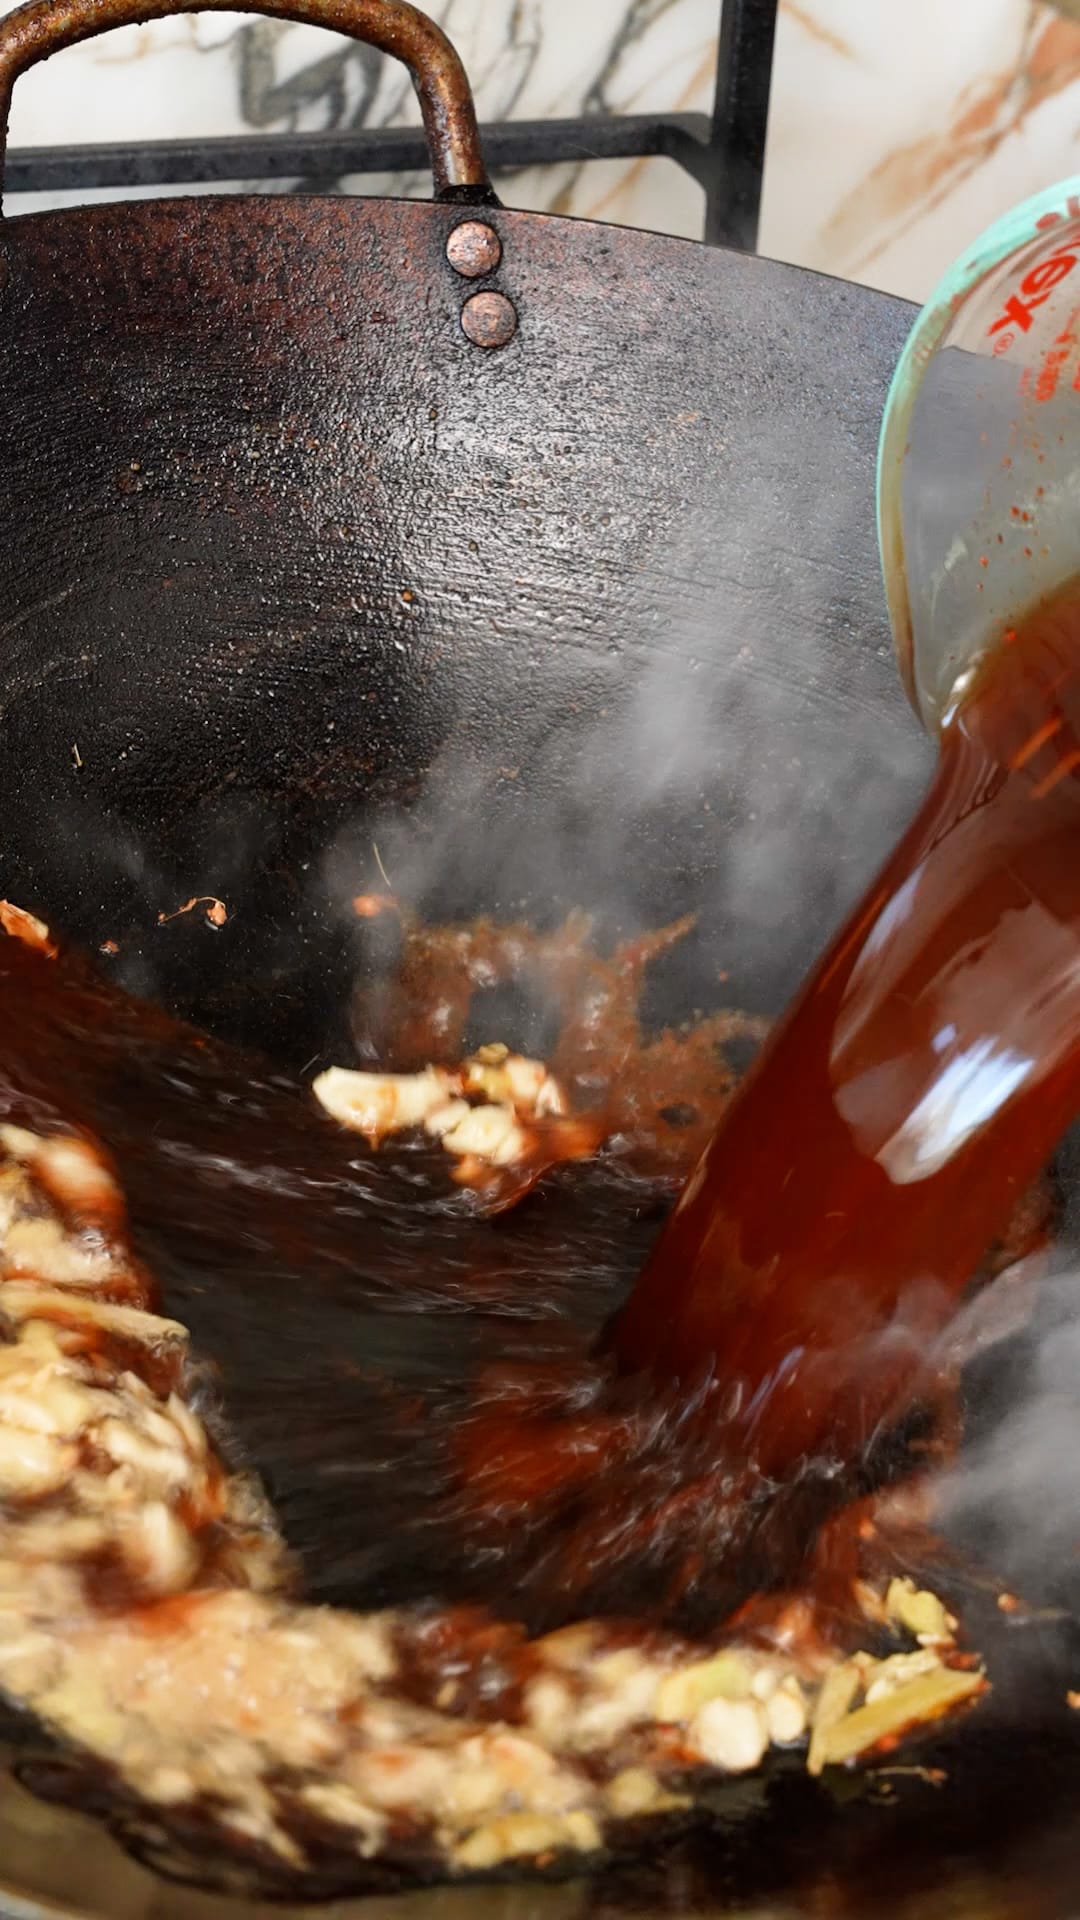 General Tso's Chicken sauce being added to the wok.